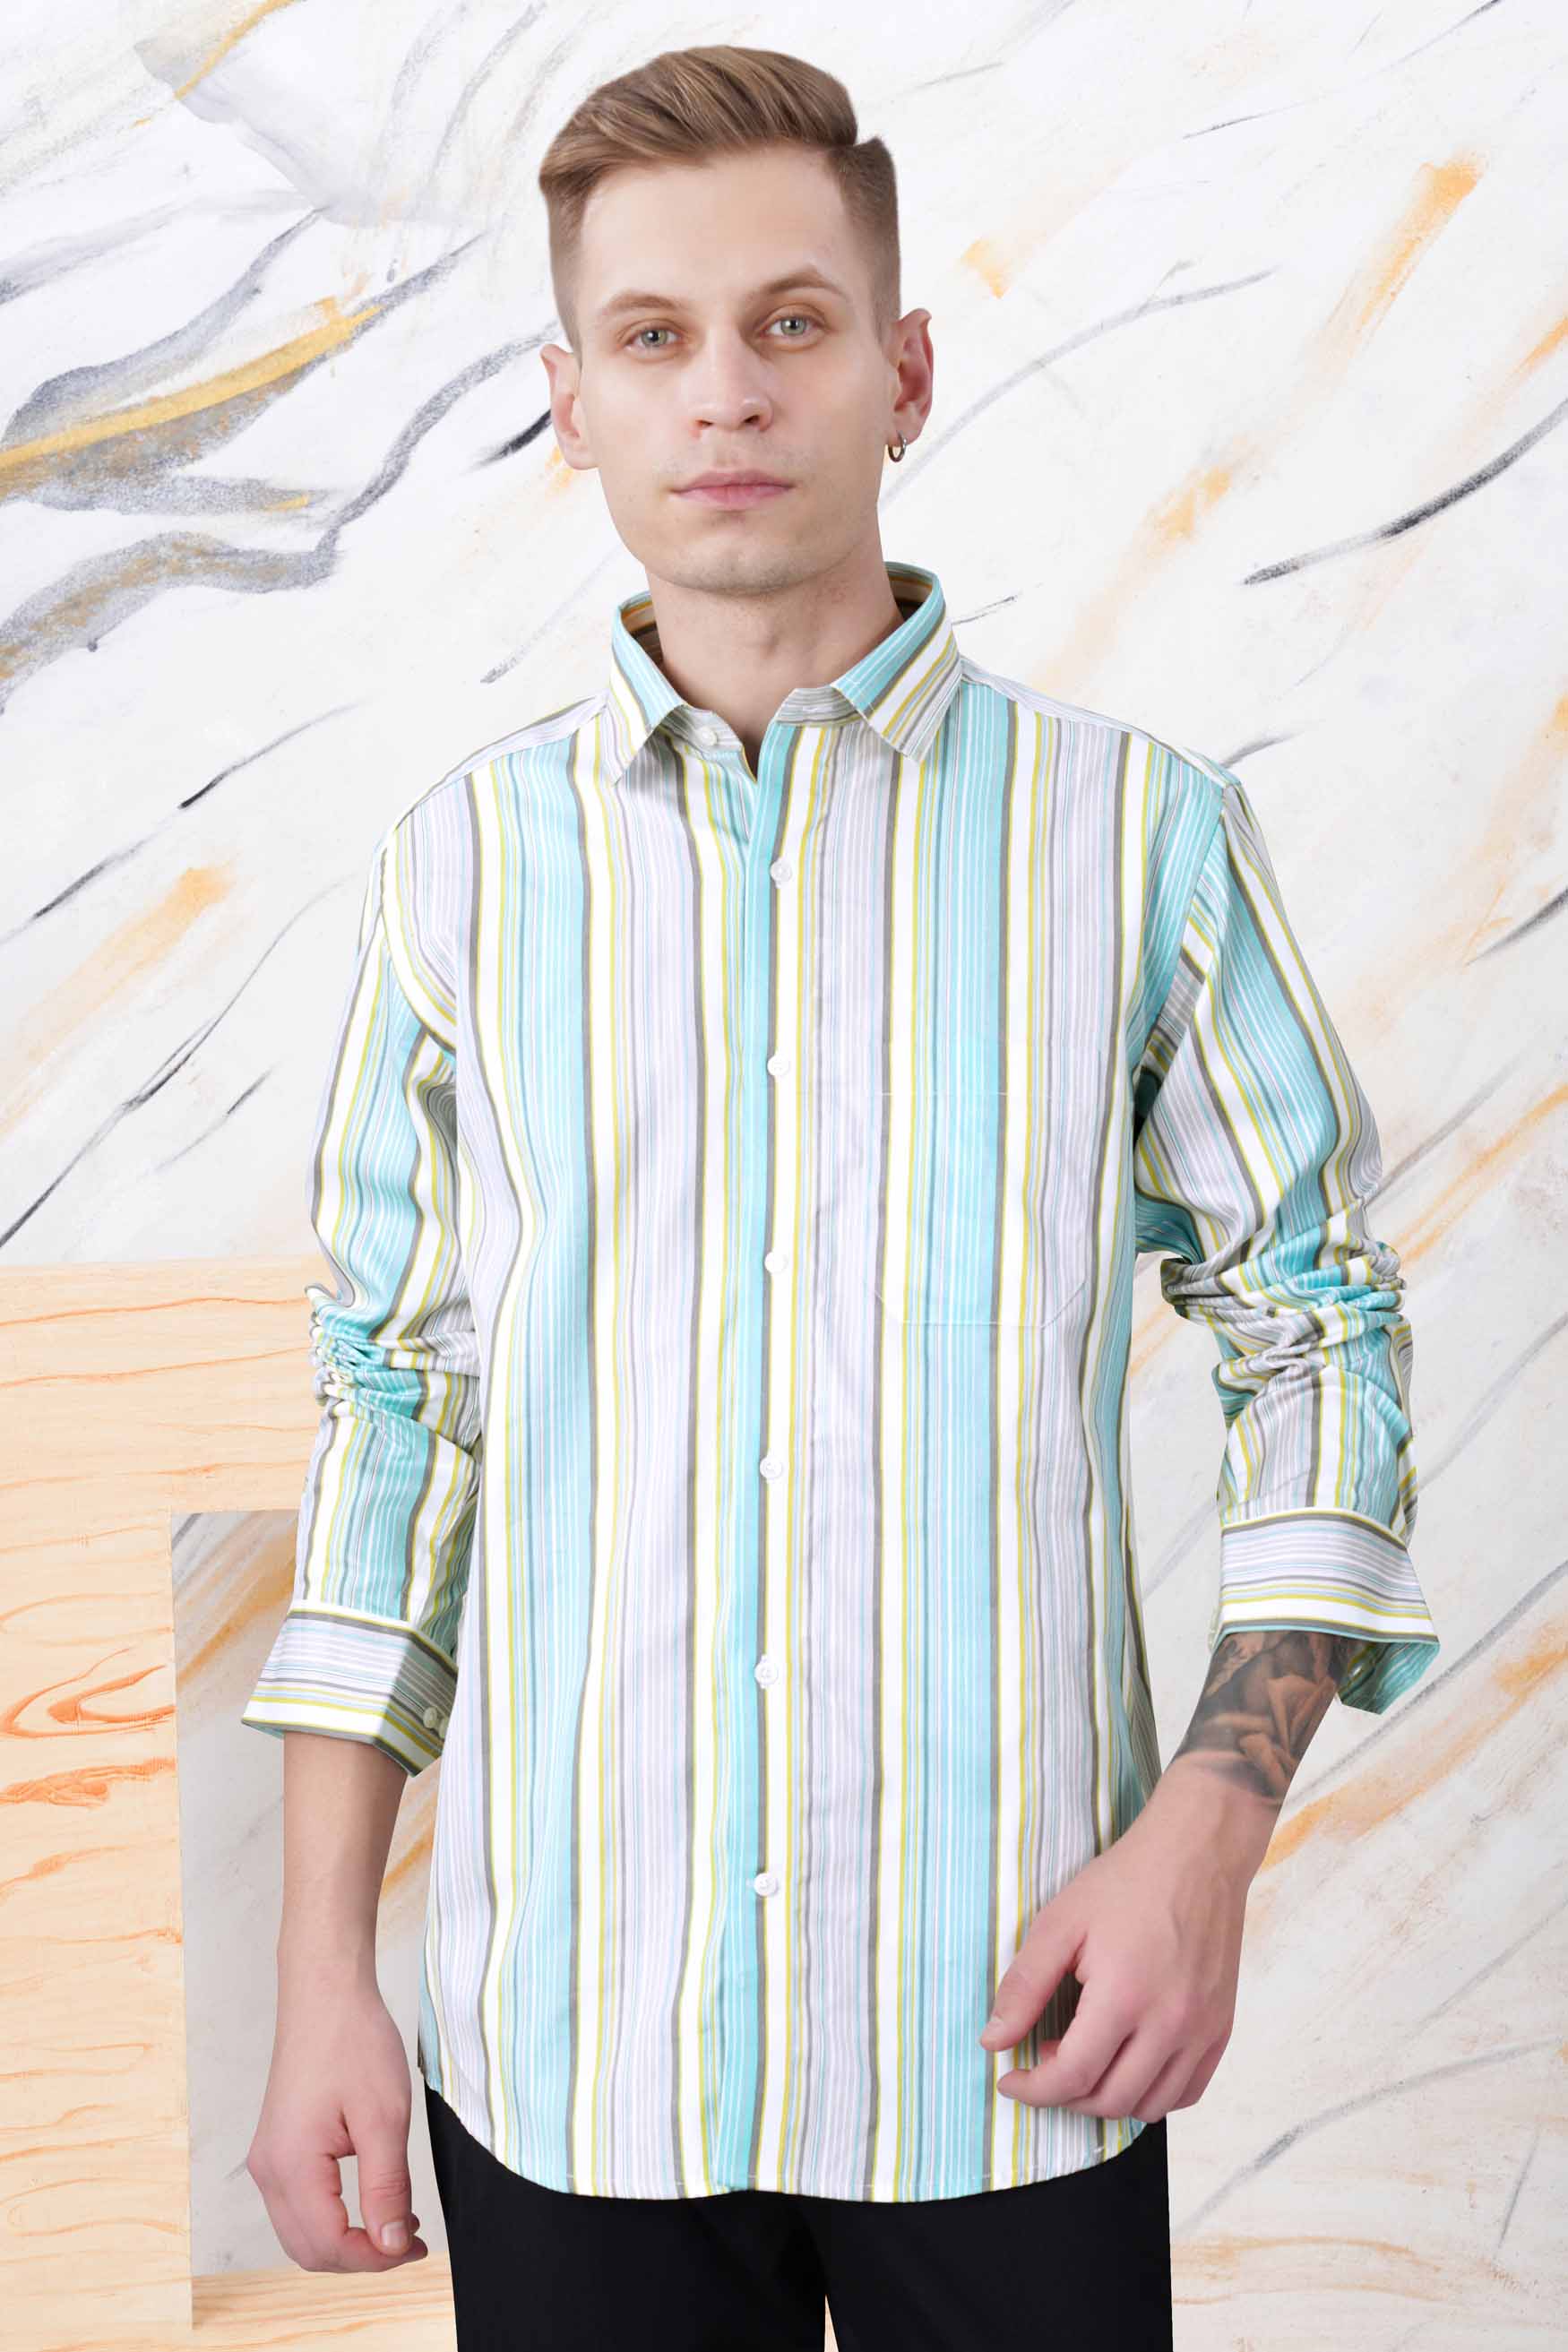 Tiffany Blue with Buff Yellow and White Striped Subtle Sheen Super Soft Premium Cotton Shirt 11596-38, 11596-H-38, 11596-39, 11596-H-39, 11596-40, 11596-H-40, 11596-42, 11596-H-42, 11596-44, 11596-H-44, 11596-46, 11596-H-46, 11596-48, 11596-H-48, 11596-50, 11596-H-50, 11596-52, 11596-H-52